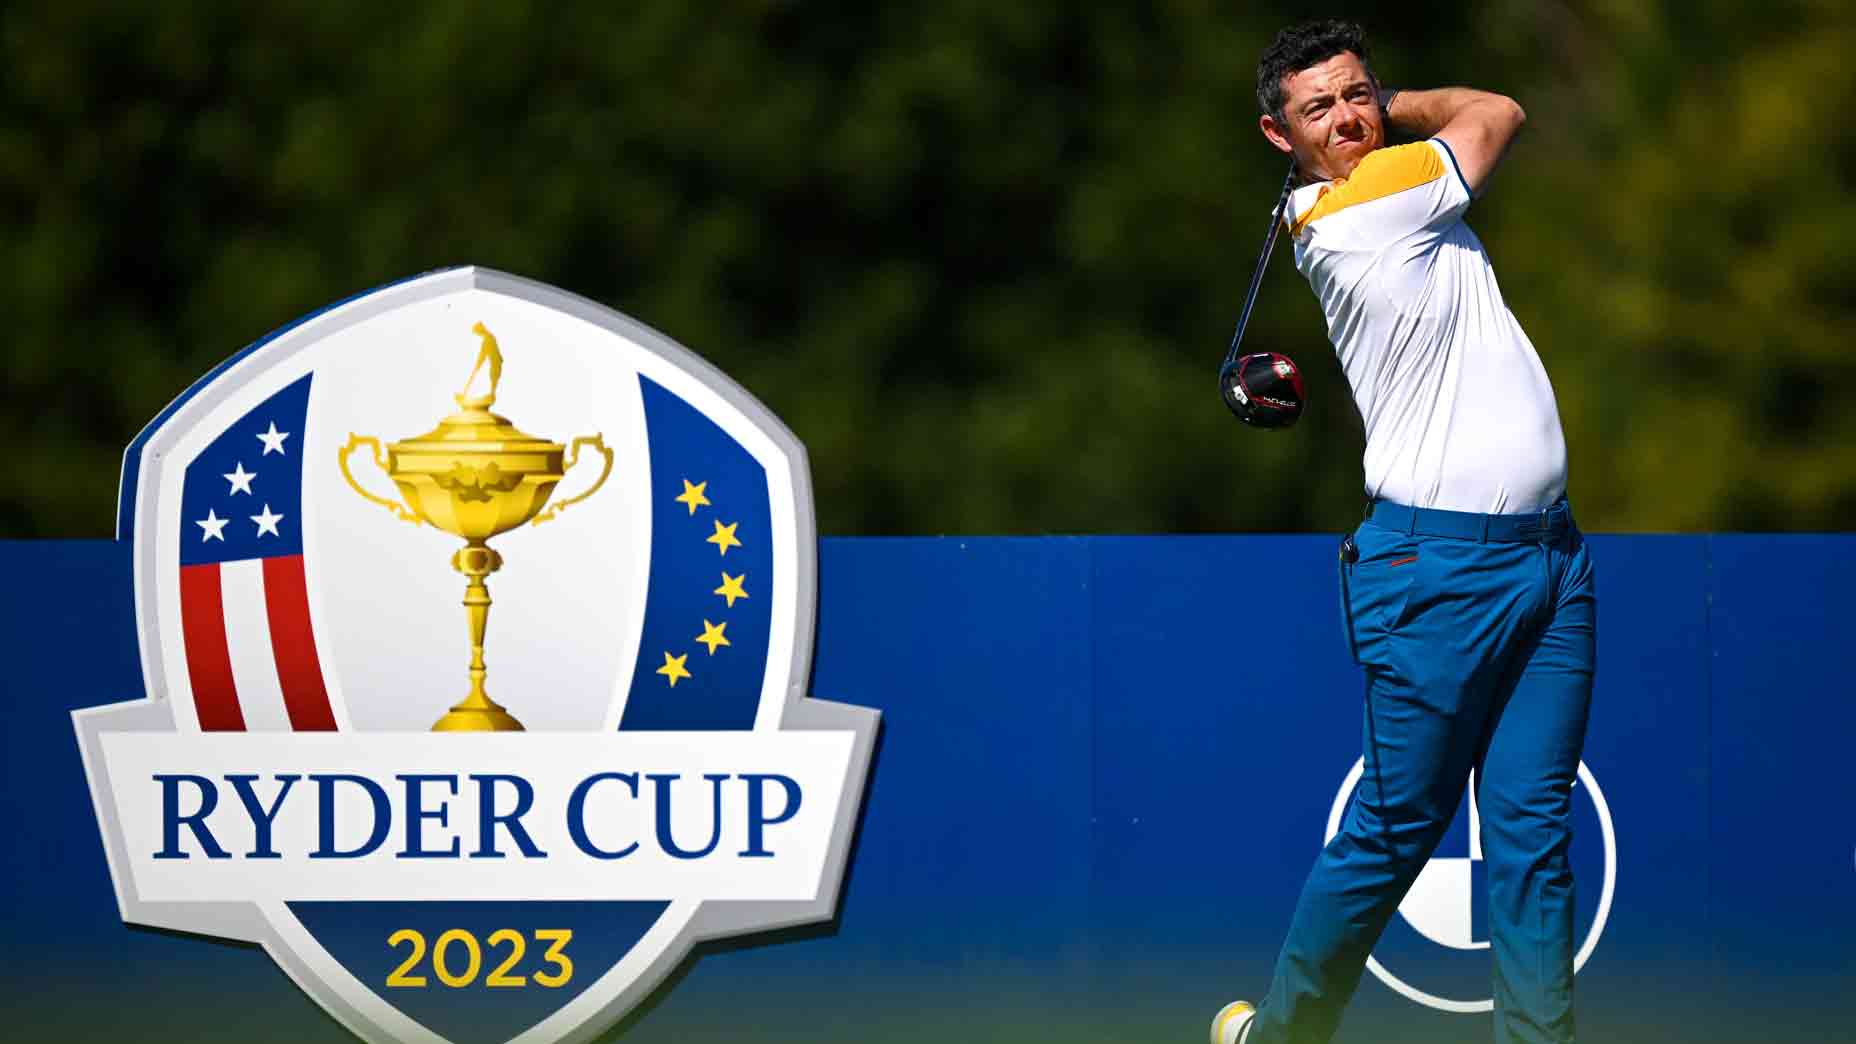 Where is the Ryder Cup in 2023? Hosted by Marco Simone Golf & Country Club near Rome, Italy, we break down what to expect from the course